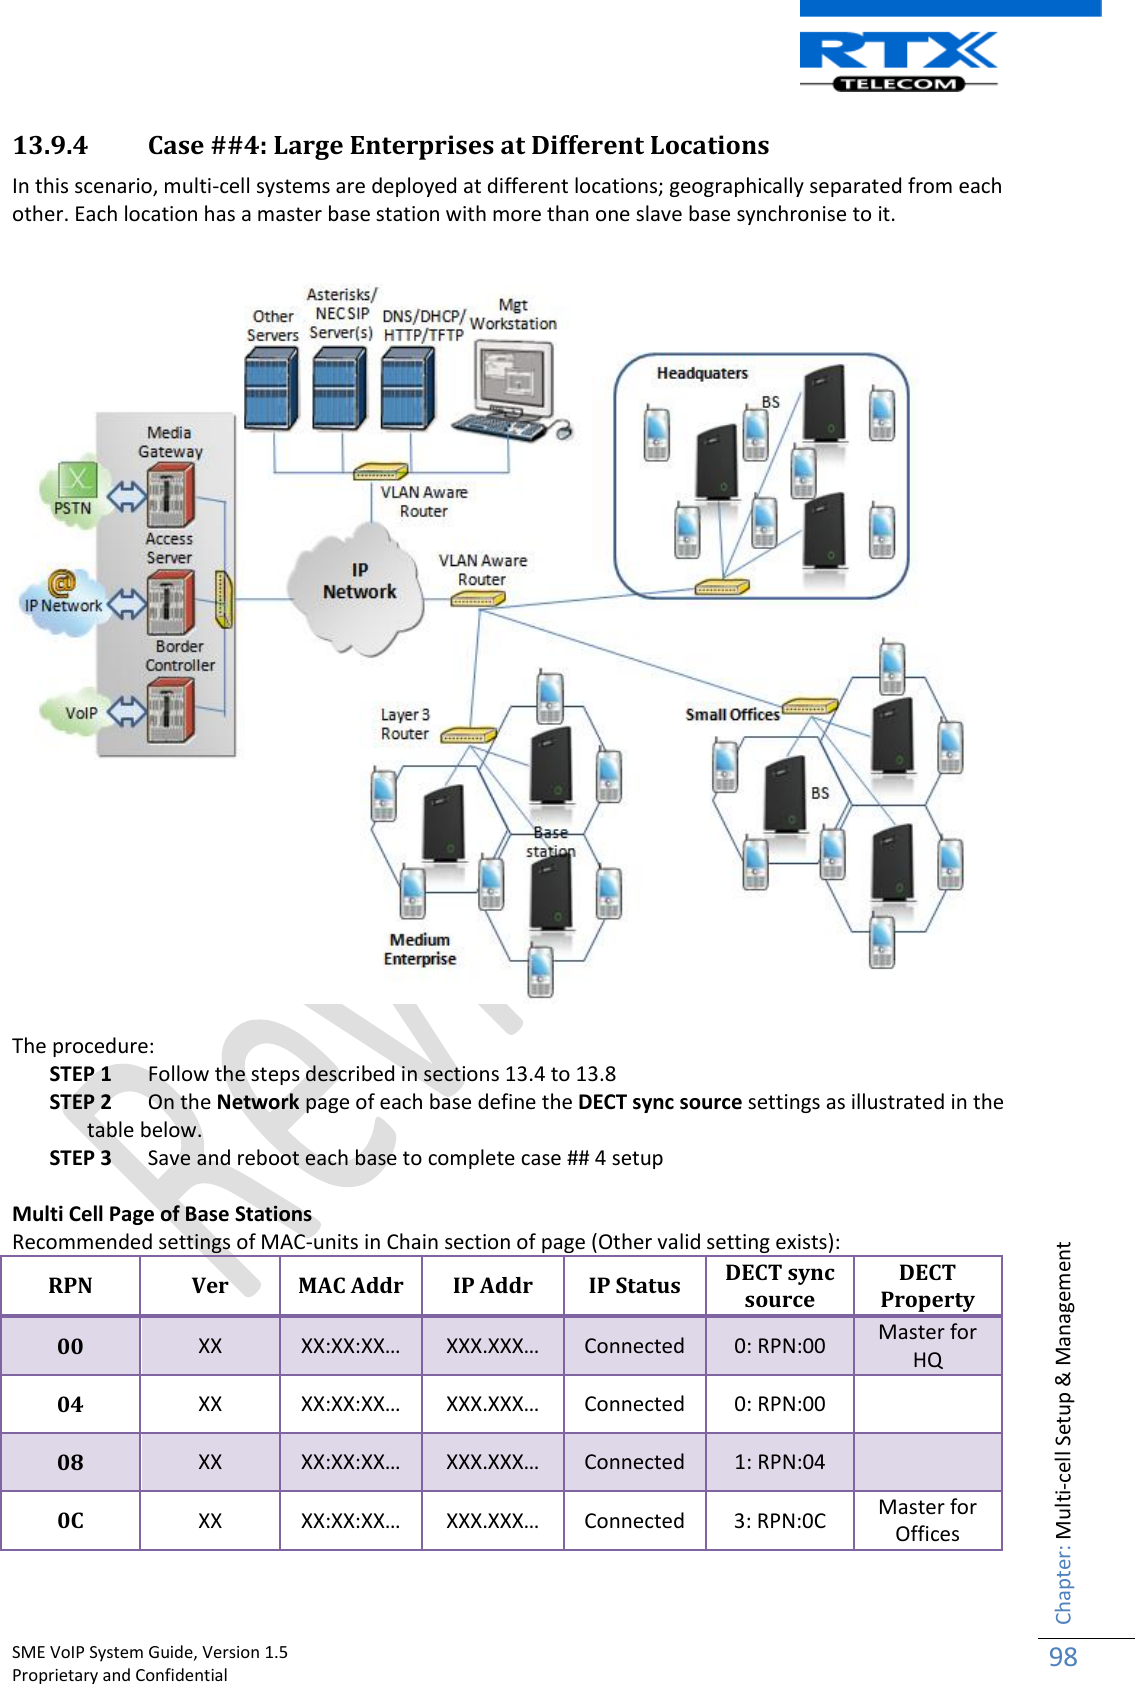    SME VoIP System Guide, Version 1.5                                                                                                                                                          Proprietary and Confidential    Chapter: Multi-cell Setup &amp; Management 98  13.9.4 Case ##4: Large Enterprises at Different Locations In this scenario, multi-cell systems are deployed at different locations; geographically separated from each other. Each location has a master base station with more than one slave base synchronise to it.      The procedure: STEP 1 Follow the steps described in sections 13.4 to 13.8 STEP 2 On the Network page of each base define the DECT sync source settings as illustrated in the table below. STEP 3 Save and reboot each base to complete case ## 4 setup  Multi Cell Page of Base Stations Recommended settings of MAC-units in Chain section of page (Other valid setting exists): RPN Ver MAC Addr IP Addr IP Status DECT sync source DECT Property 00 XX XX:XX:XX… XXX.XXX… Connected 0: RPN:00 Master for HQ 04 XX XX:XX:XX… XXX.XXX… Connected 0: RPN:00  08 XX XX:XX:XX… XXX.XXX… Connected 1: RPN:04  0C XX XX:XX:XX… XXX.XXX… Connected 3: RPN:0C Master for Offices 